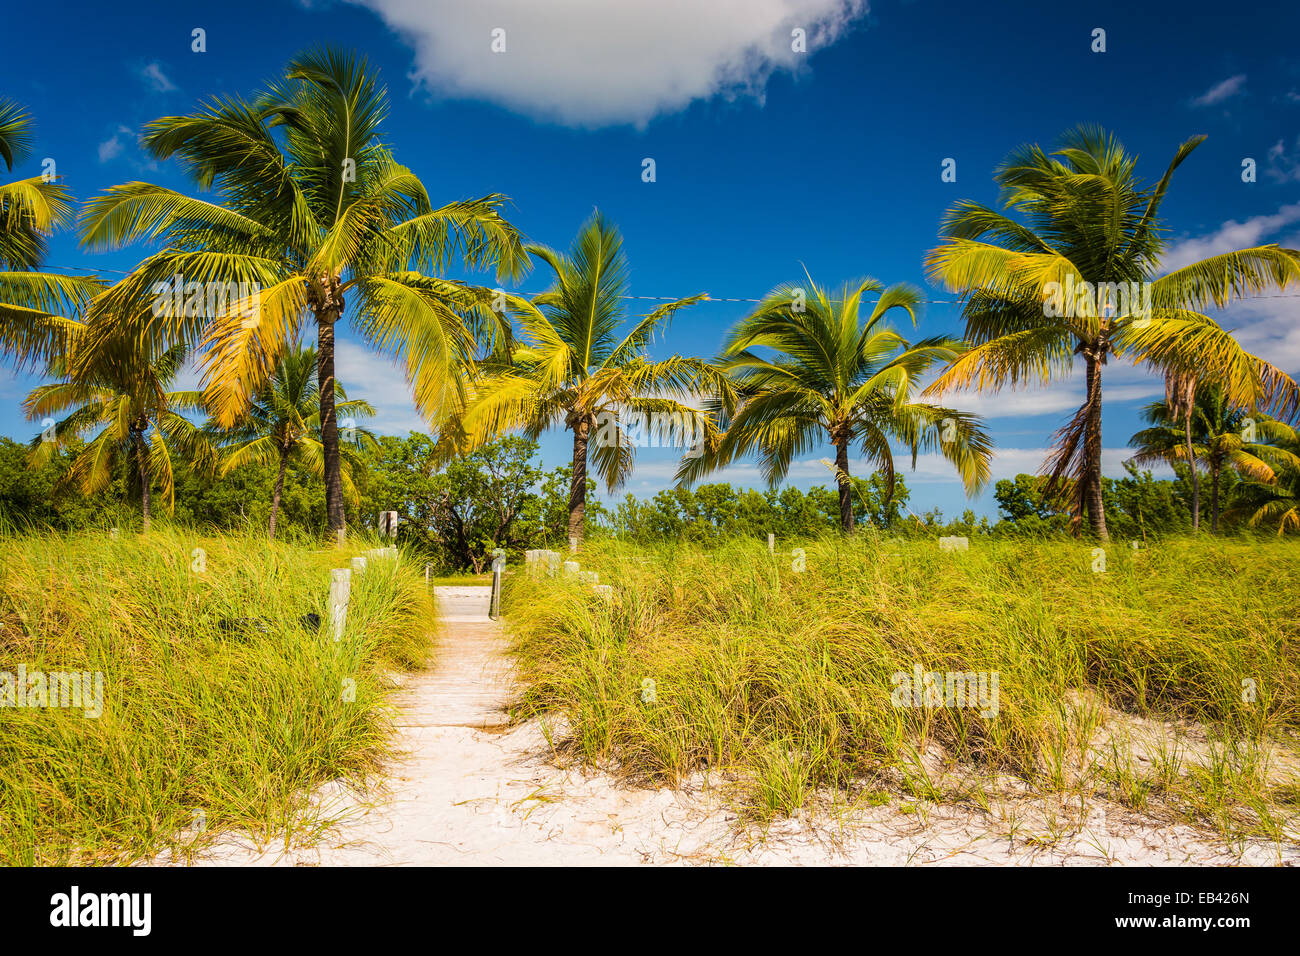 Palm trees and beach path at Smathers Beach, Key West, Florida. Stock Photo